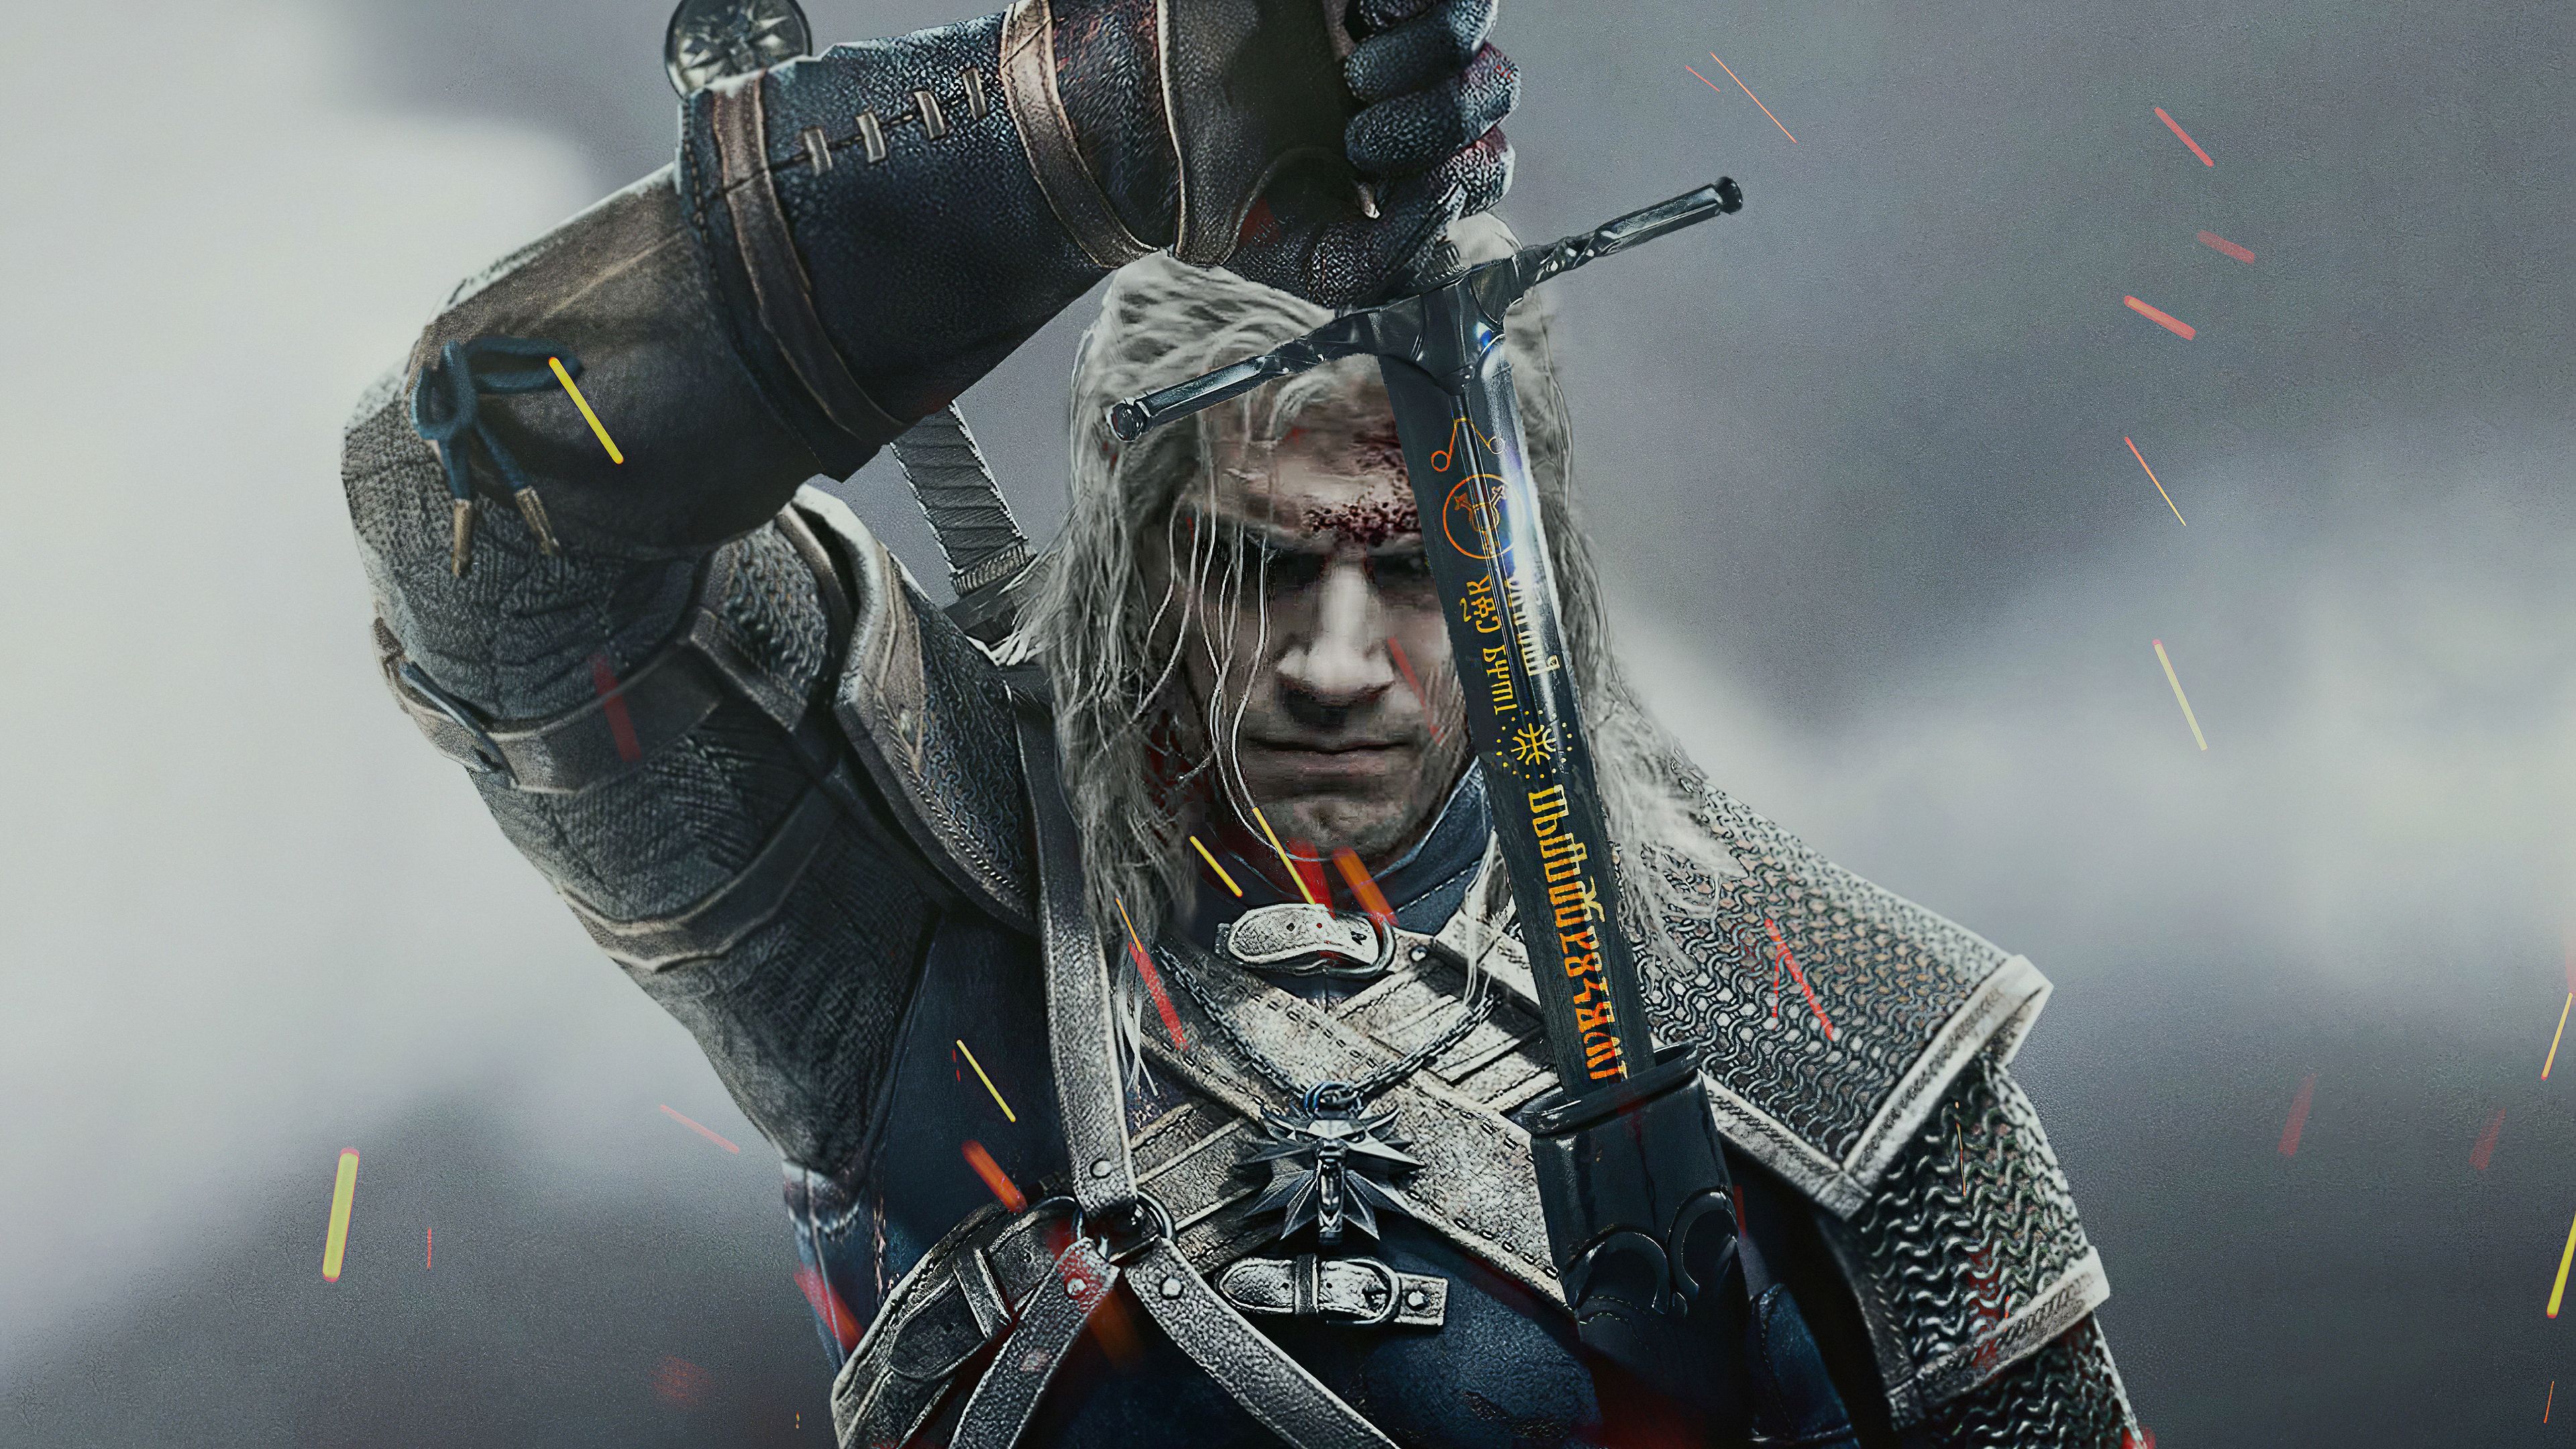 The Witcher Henry The Witcher HD wallpaper, The Witcher background HD 4k, The Witcher 4k wallpaper. The witcher, Tv series, Netflix tv